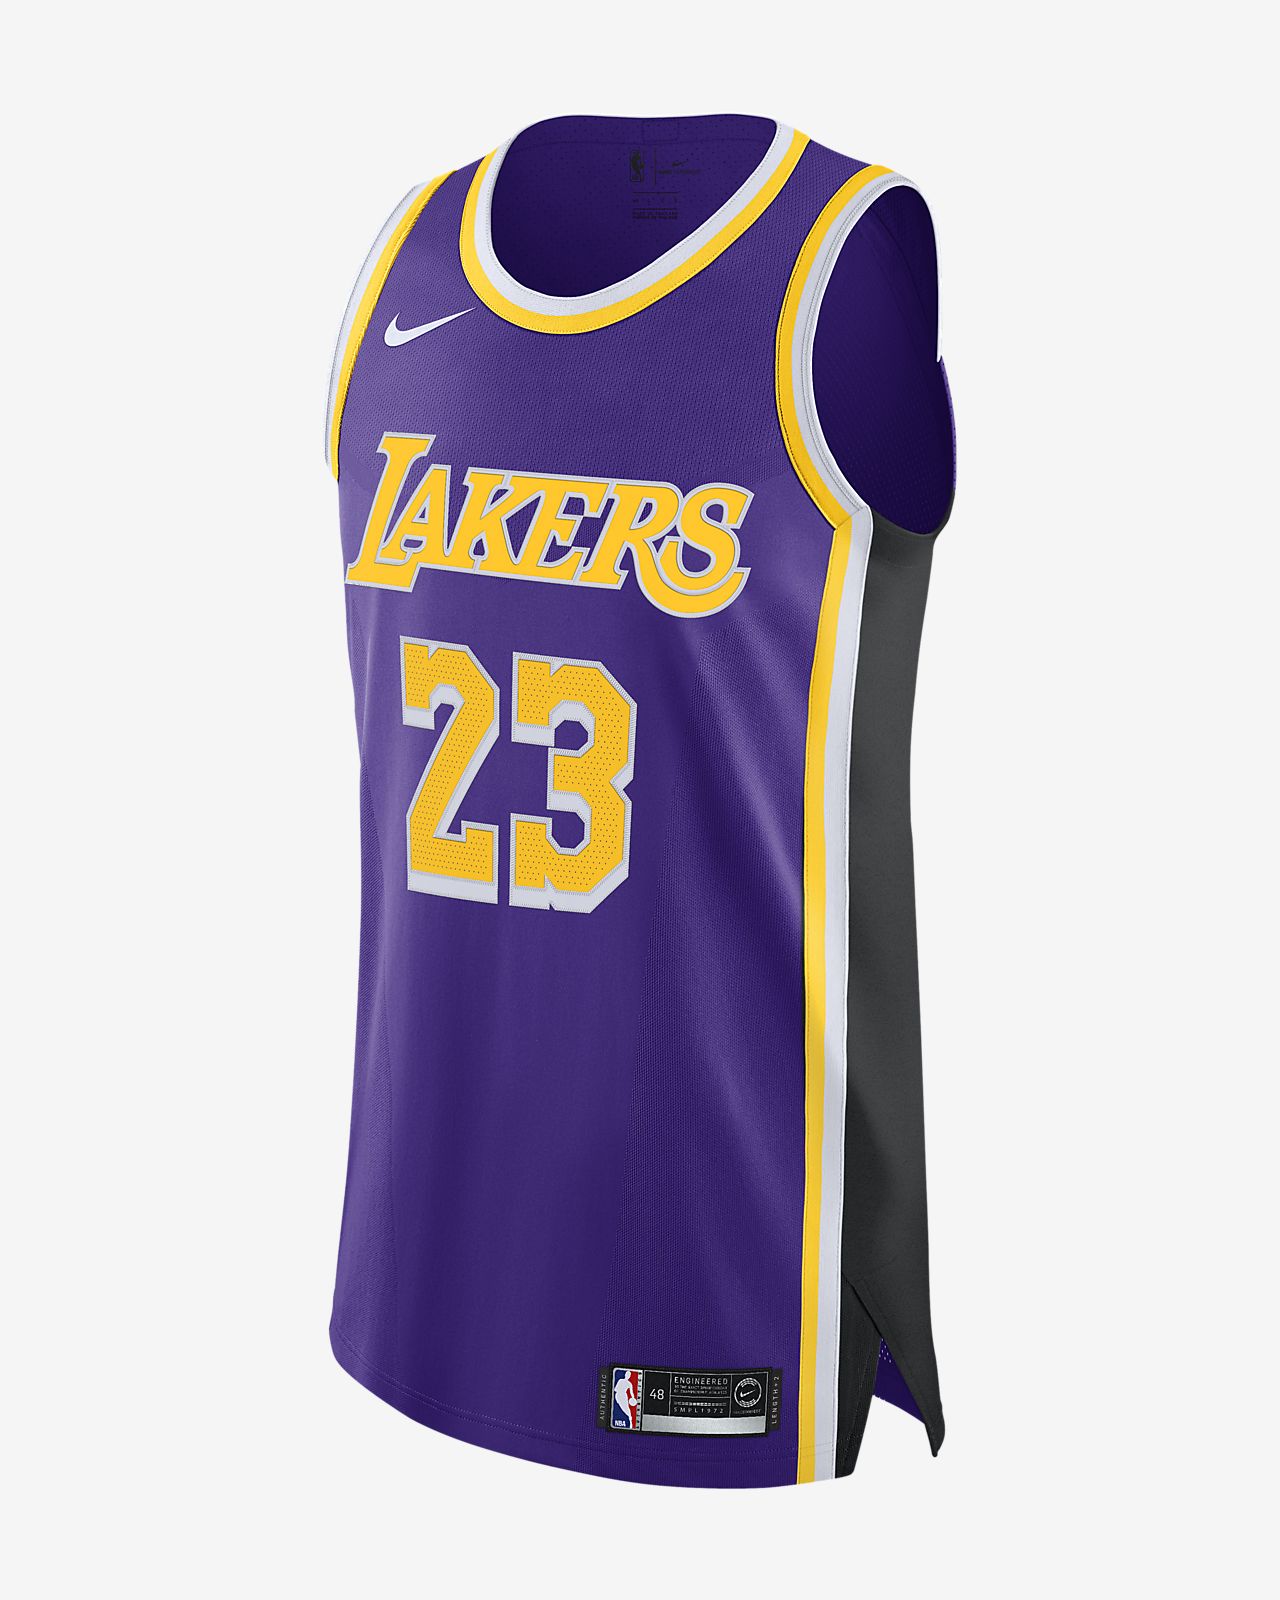 lebron james jersey authentic lakers